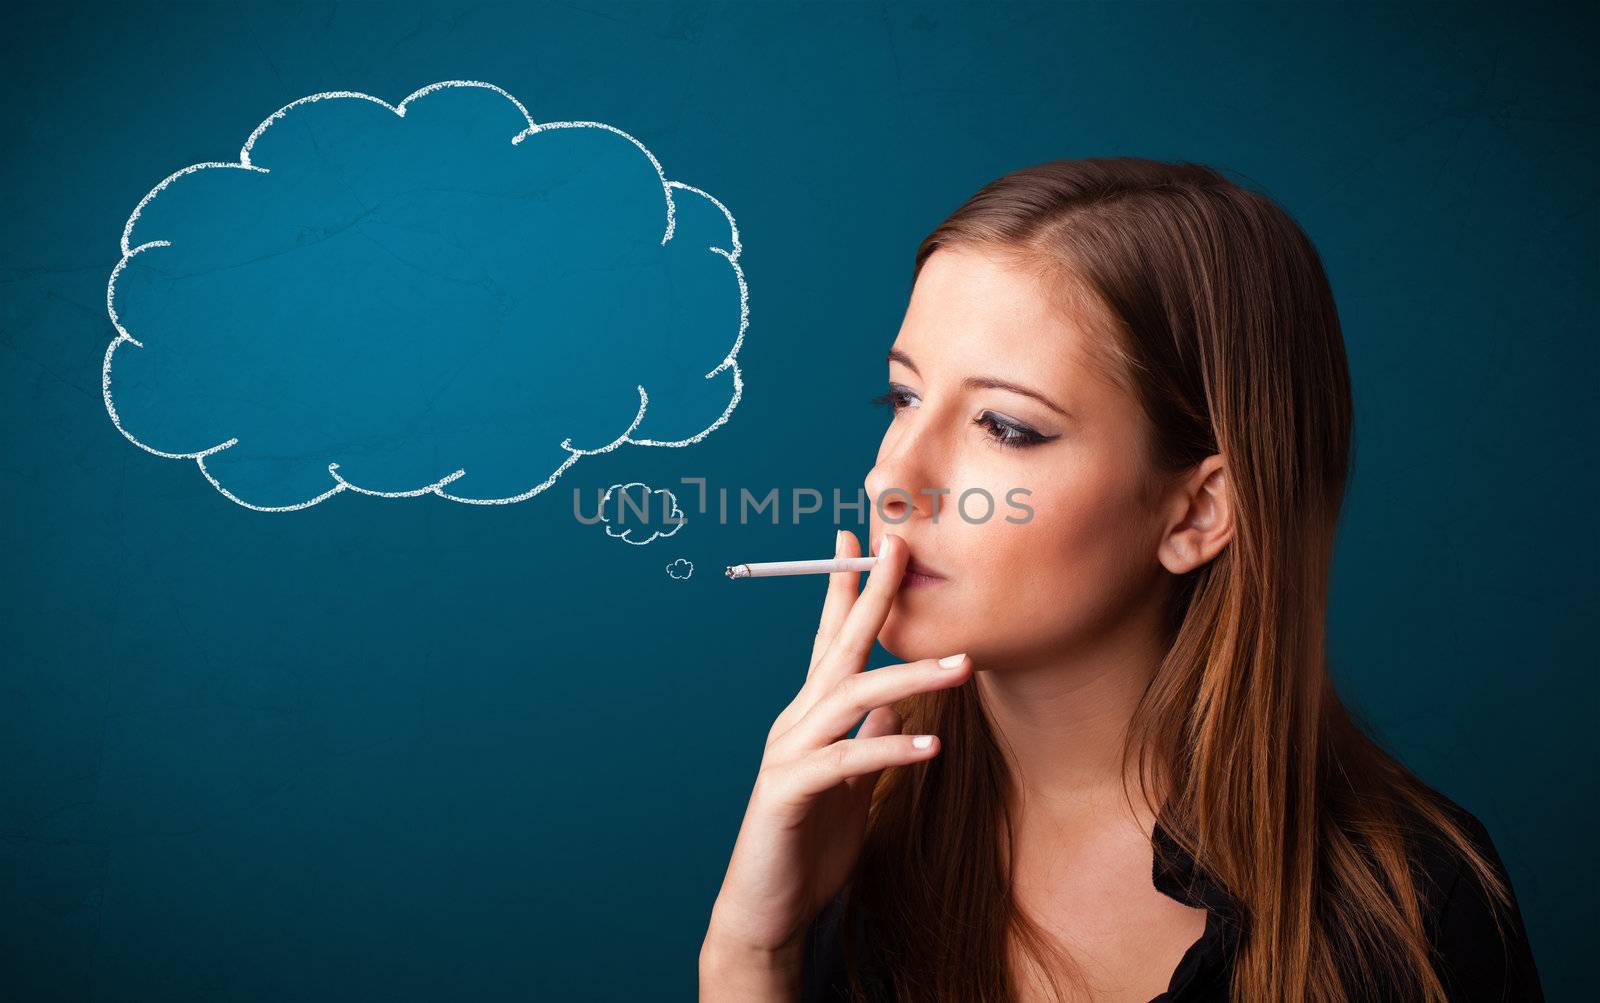 Beautiful young lady smoking cigarette with idea cloud